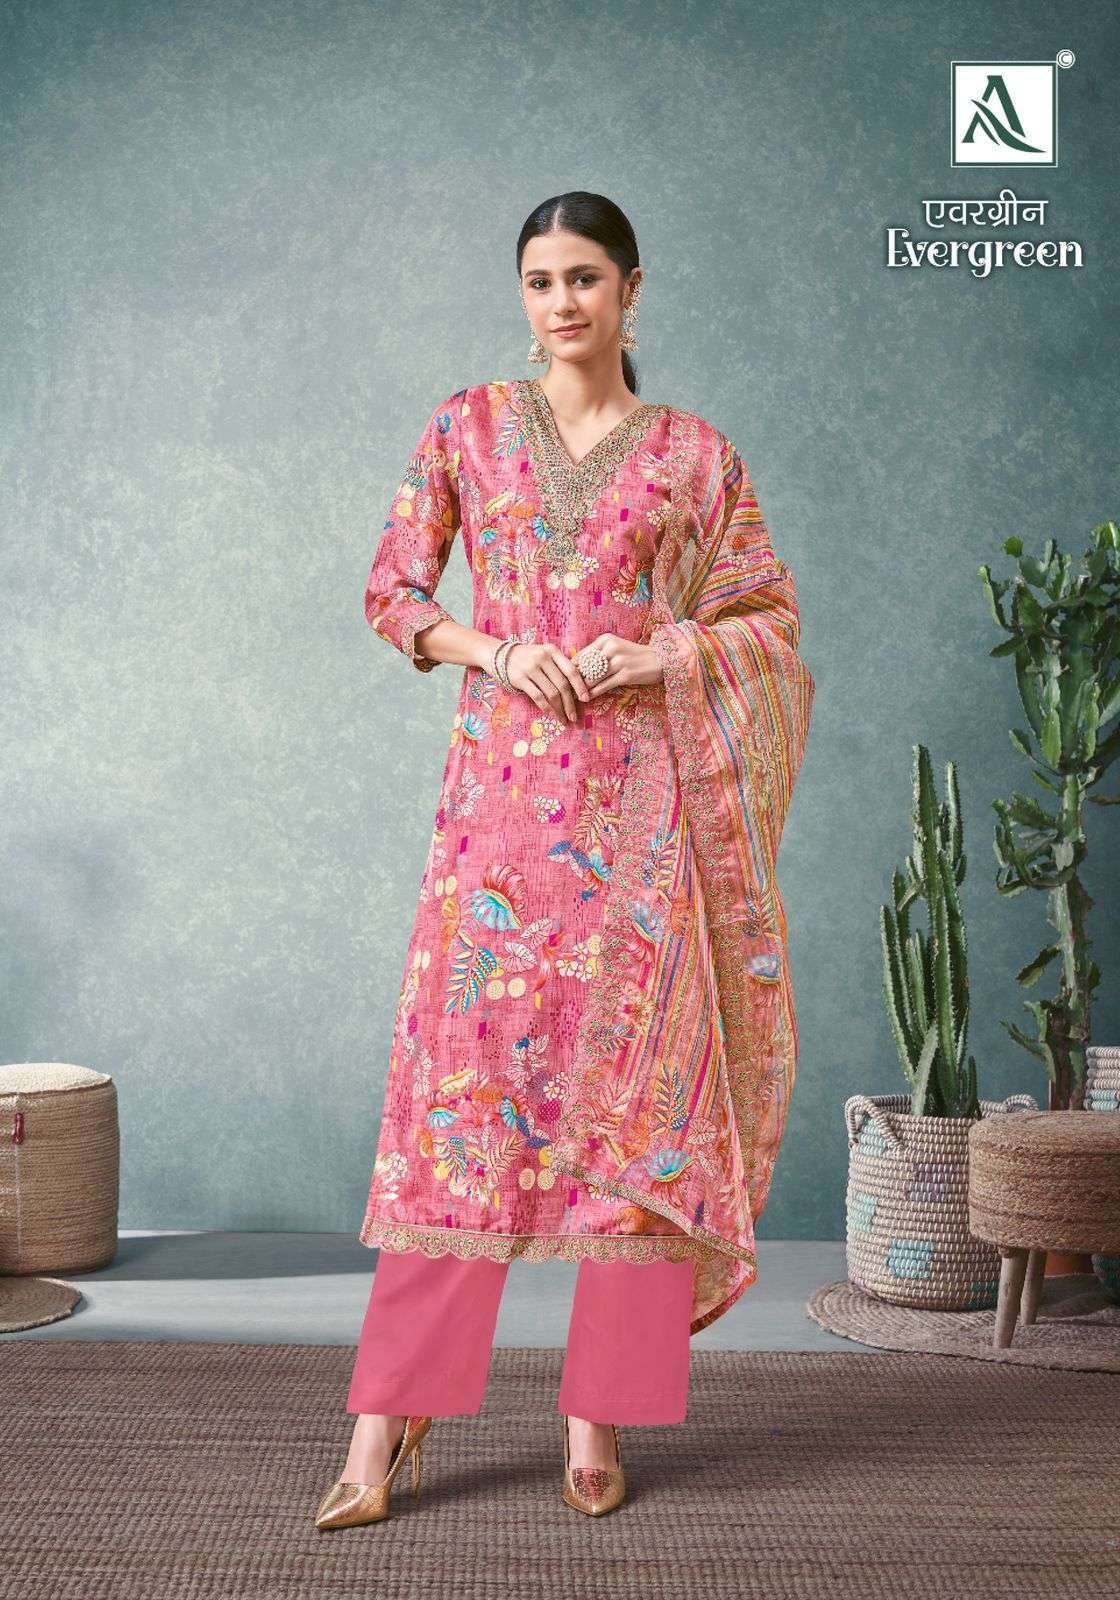 Alok Suit Evergreen Organza With Embroidery Work Salwar Kameez Latest Collection